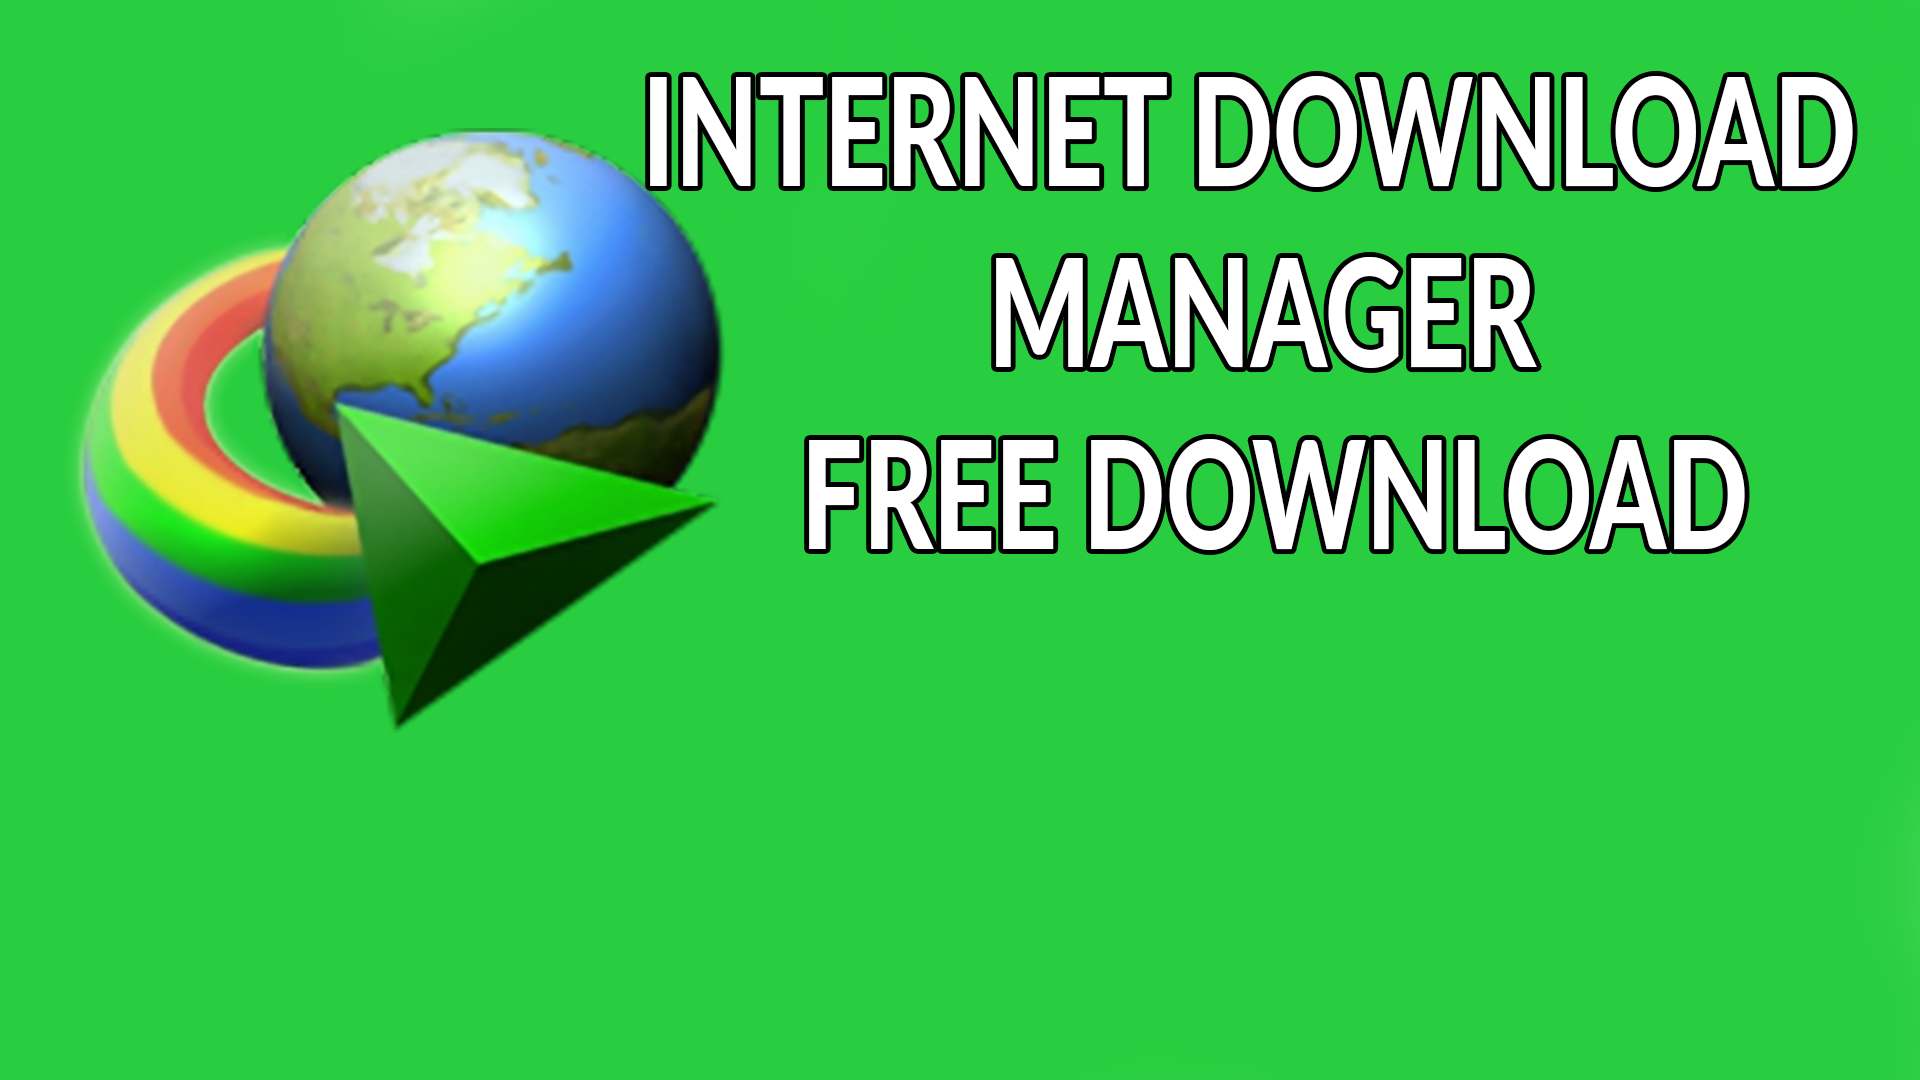 down internet download manager idm free